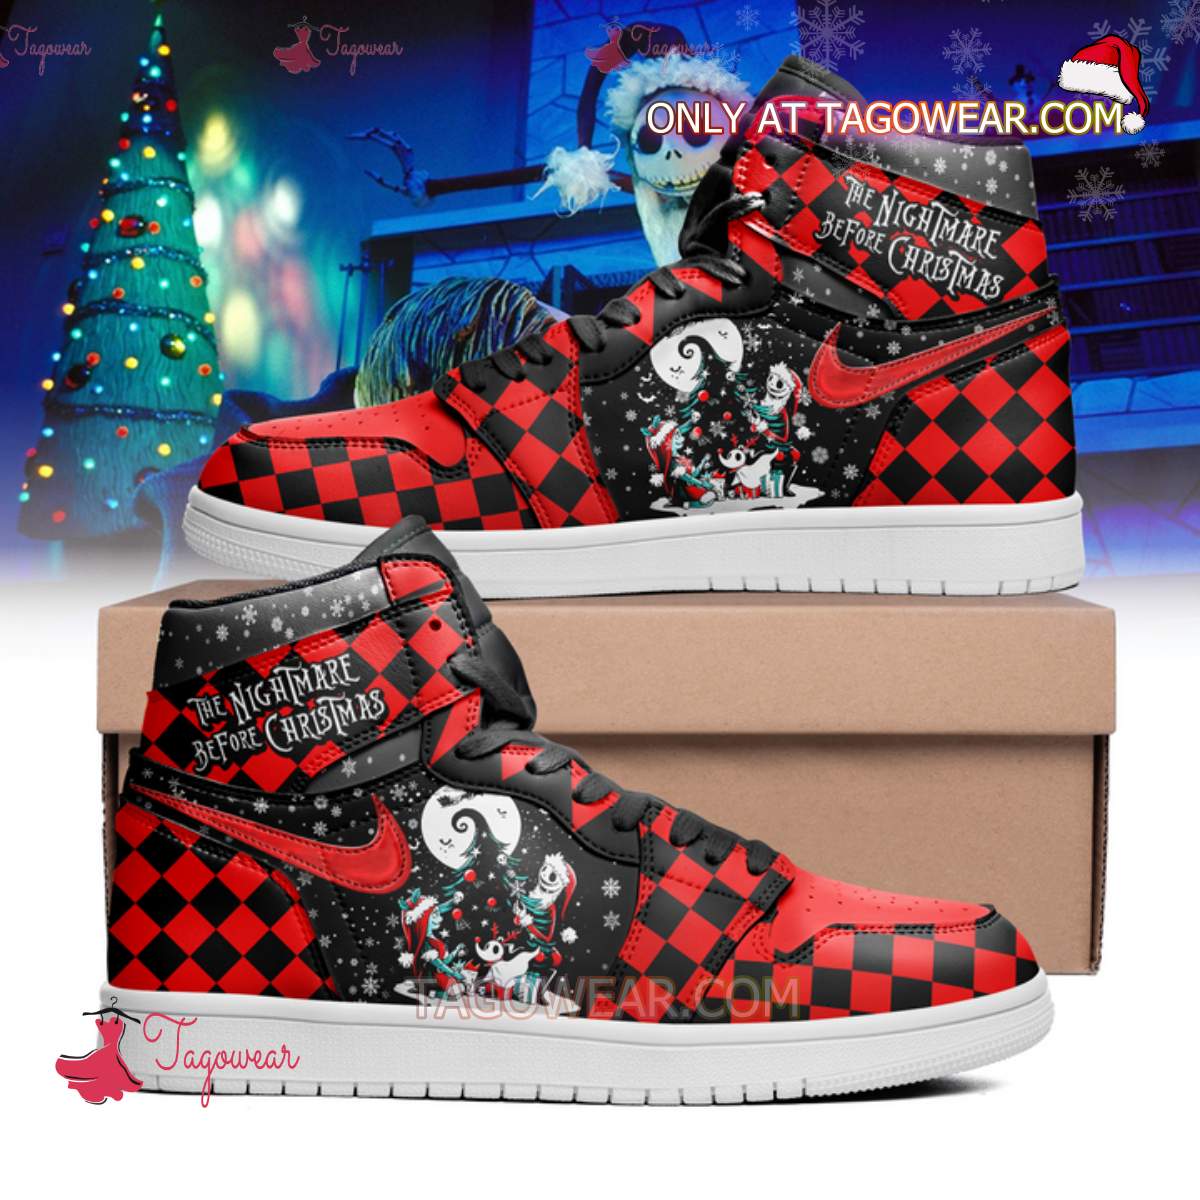 The Nightmare Before Christmas Red Black Checkerboard Personalized Air Jordan High Top Shoes